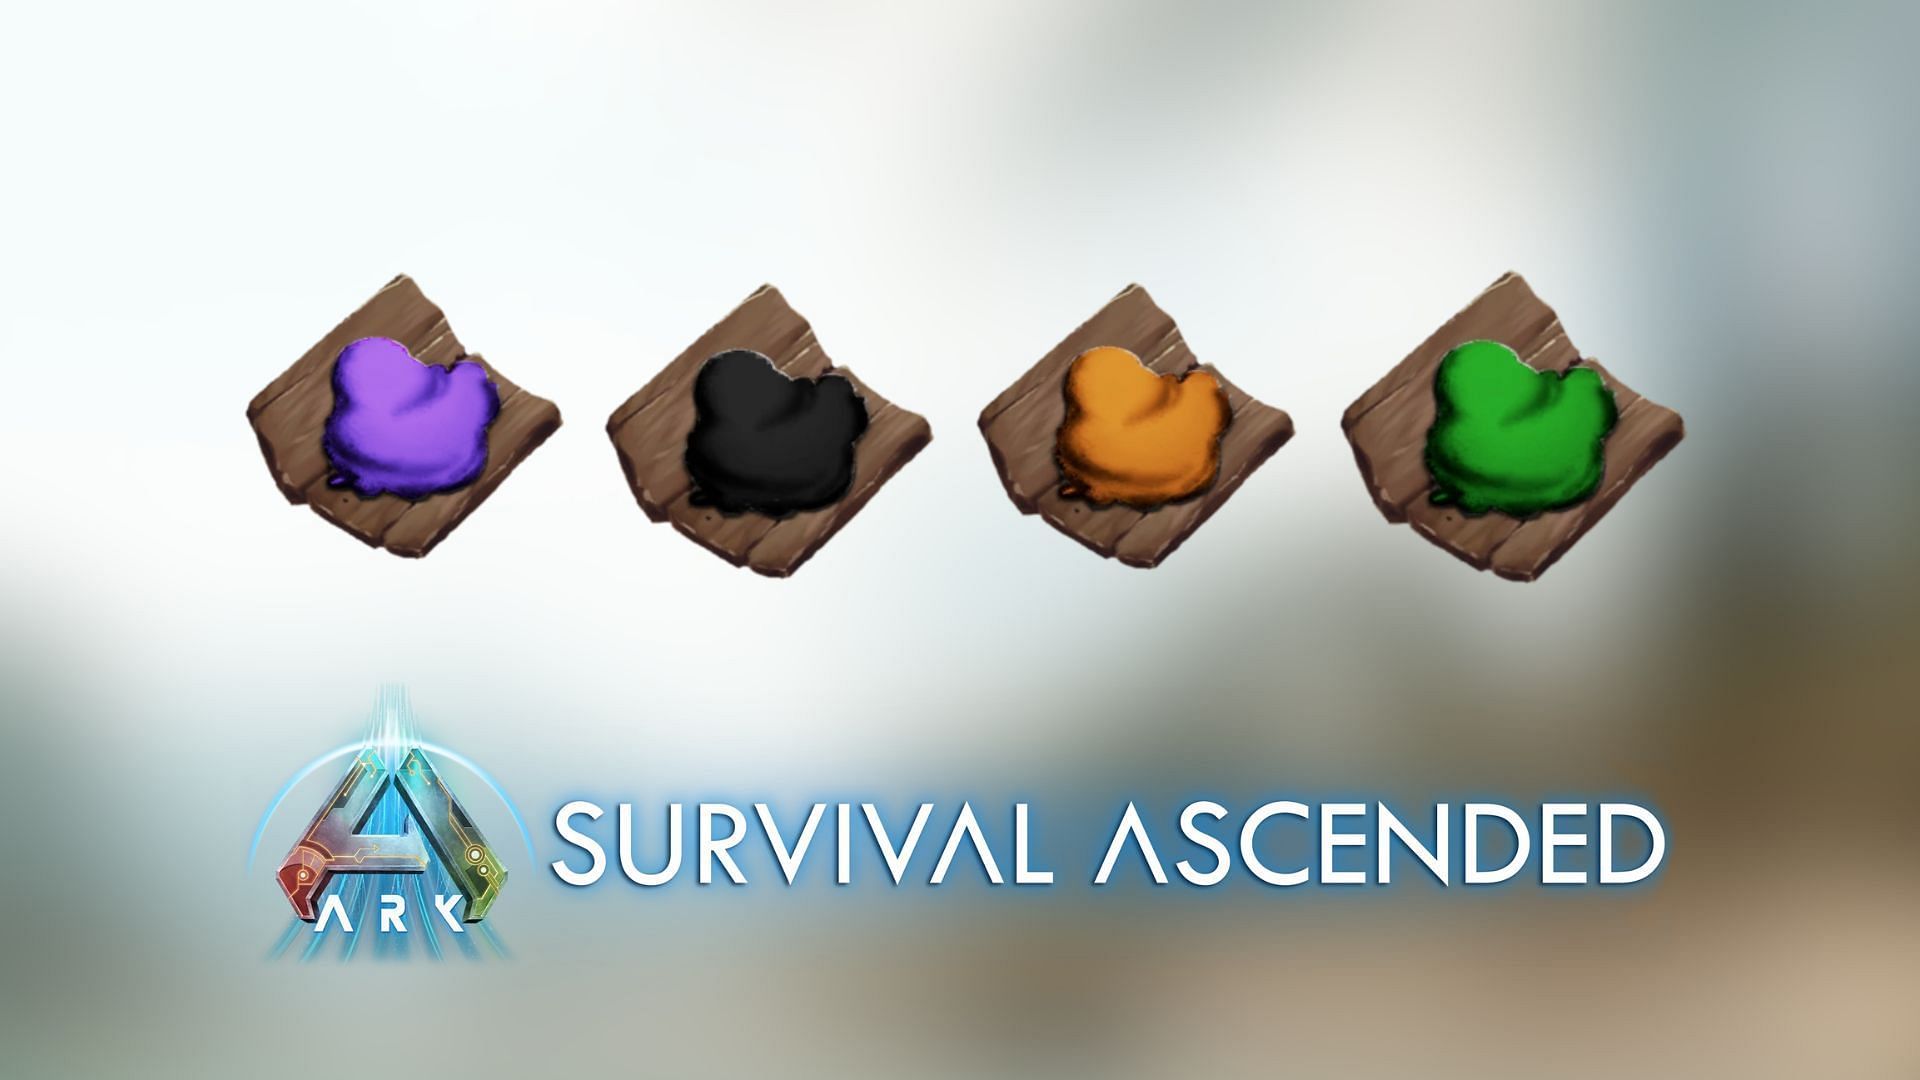 How to prepare and use Dye in Ark Survival Ascended